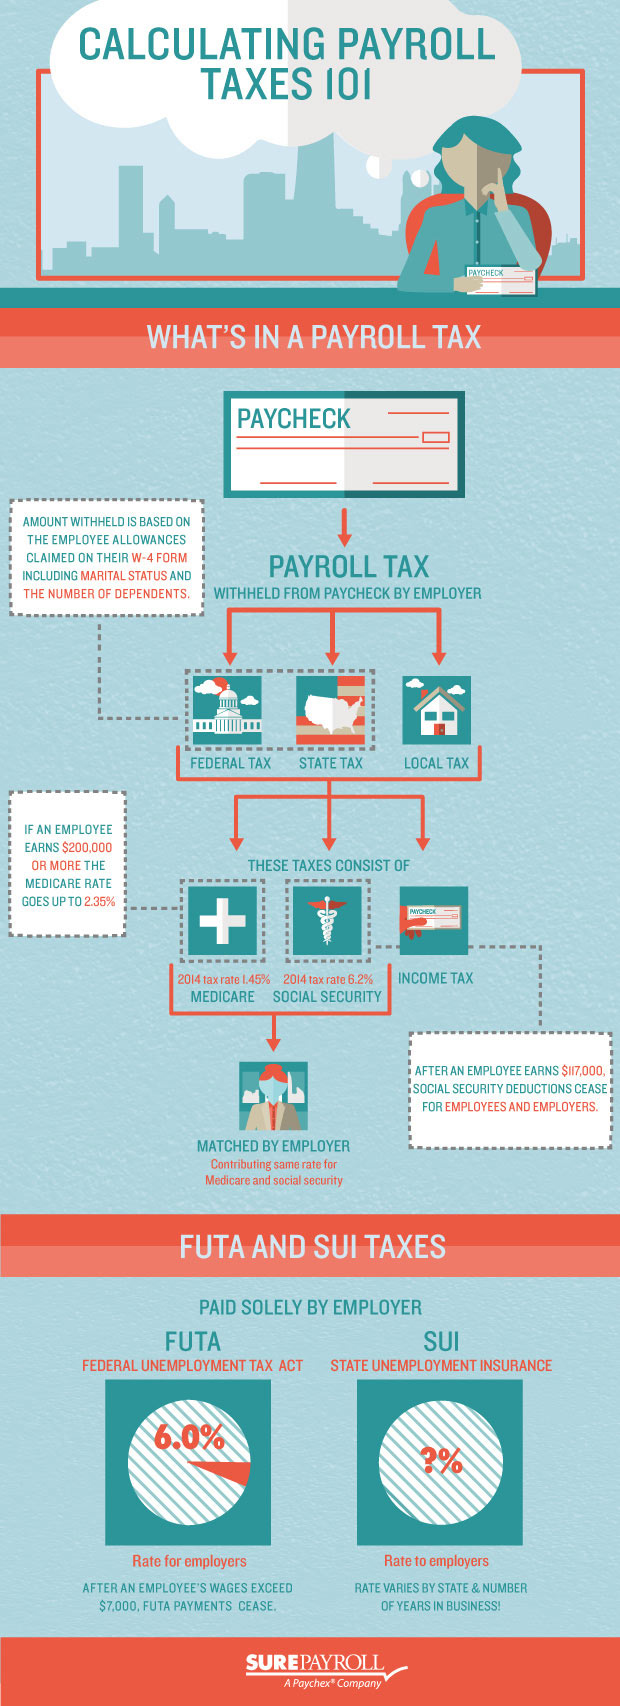 Calculating payroll taxes 101 - infographic